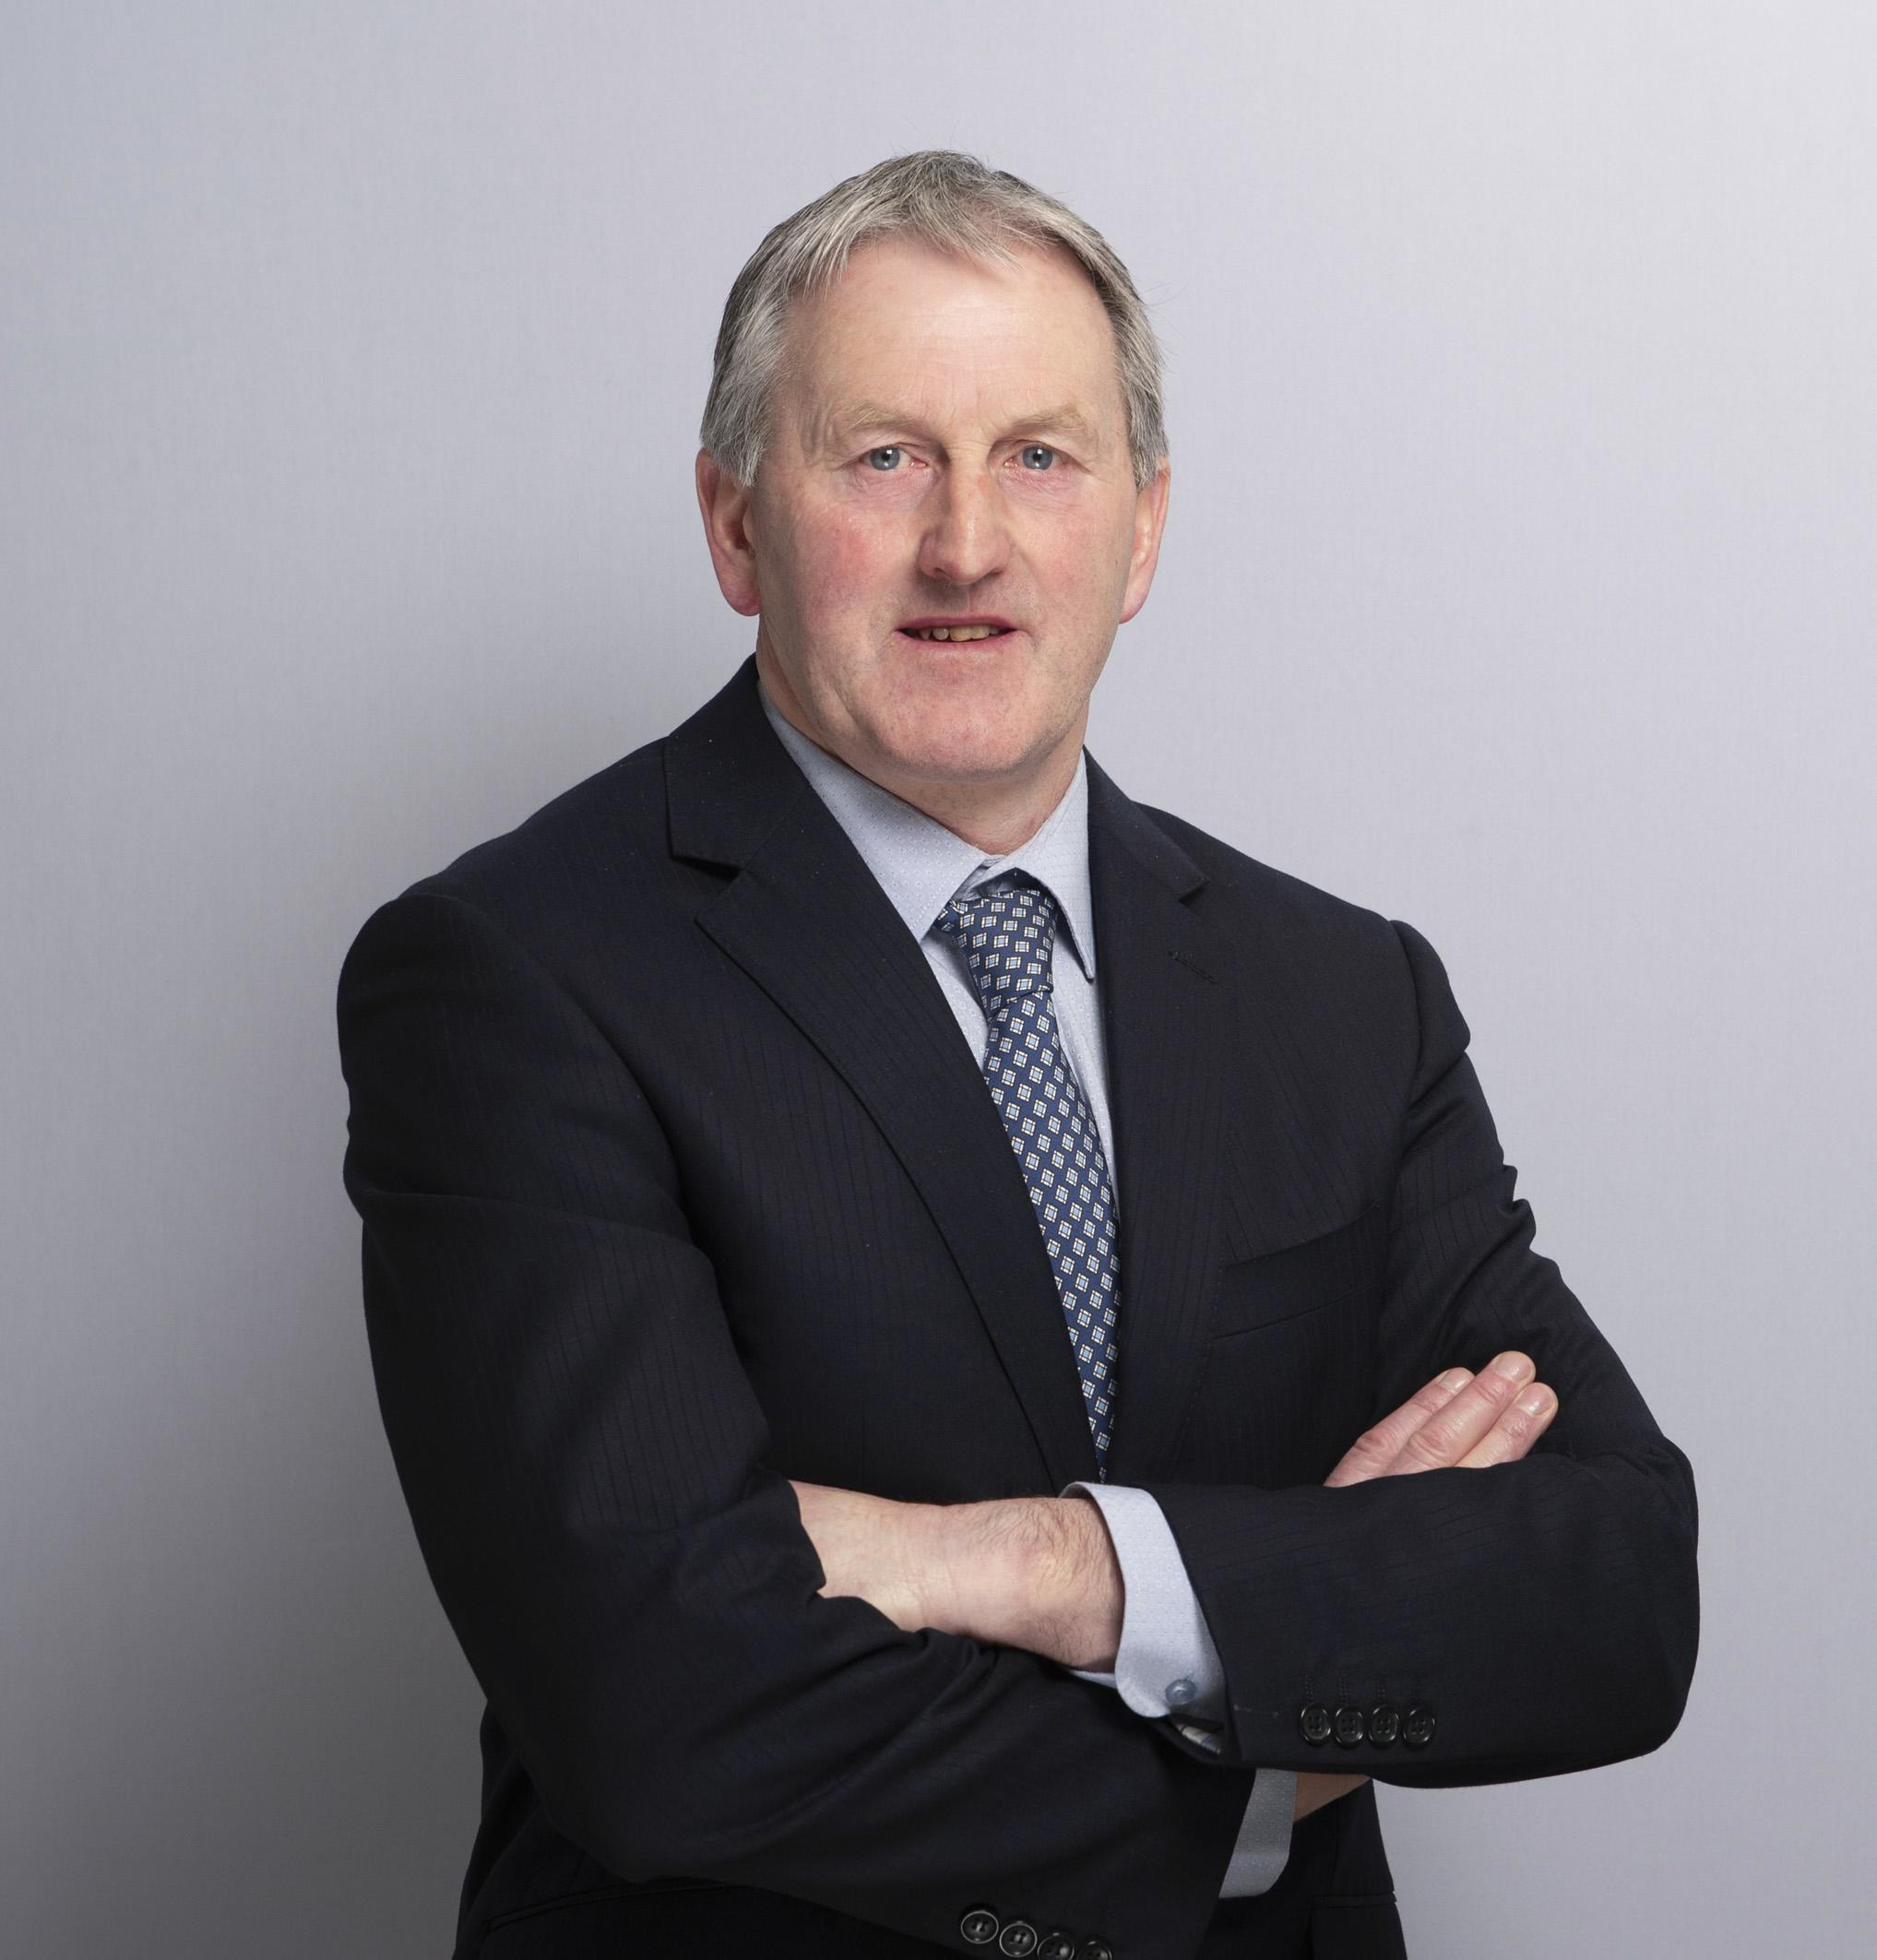 Dairygold Elects A New Vice Chairman